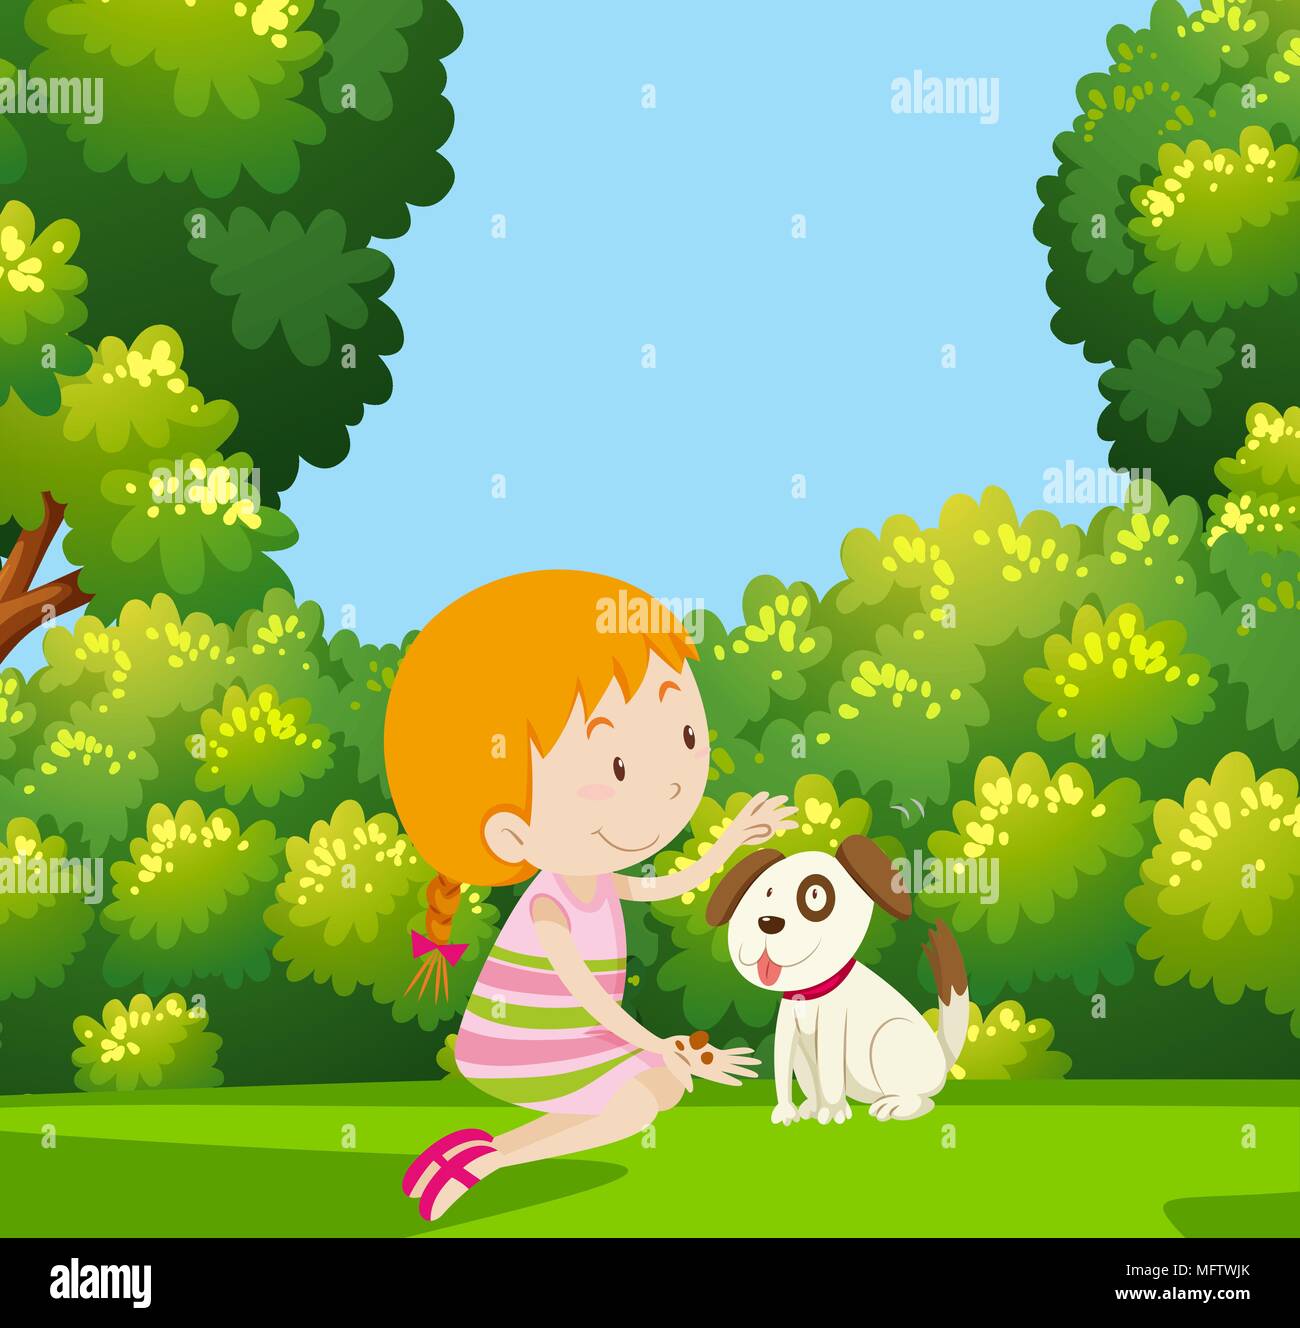 Girl Playing with Dog in Garden illustration Stock Vector